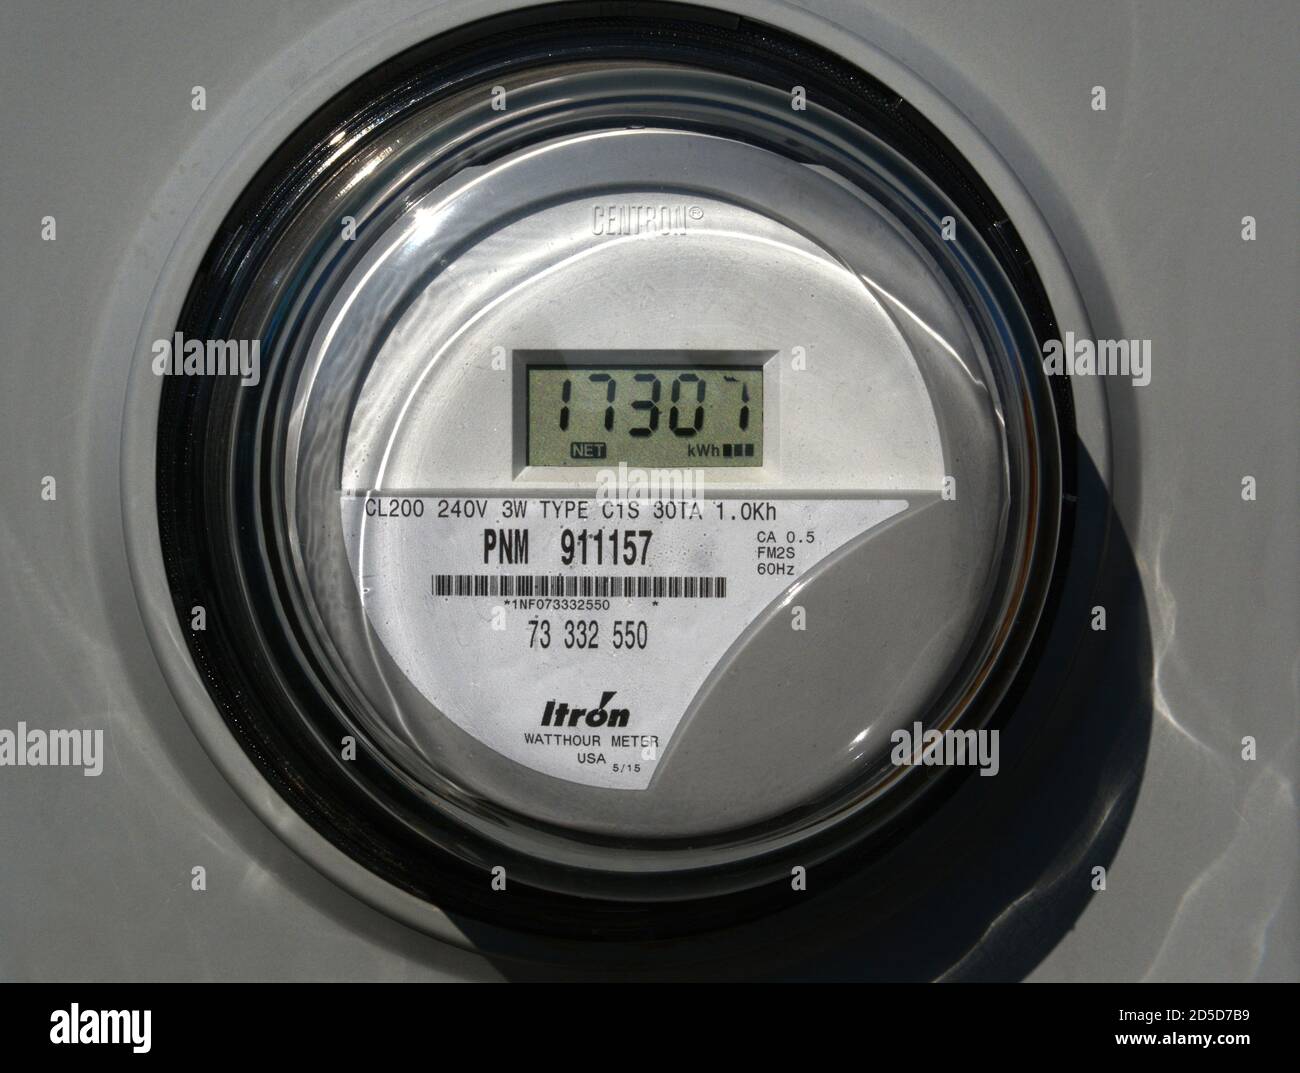 A Centron residential electric meter manufactured by Itron on a home in Santa Fe, New Mexico USA Stock Photo